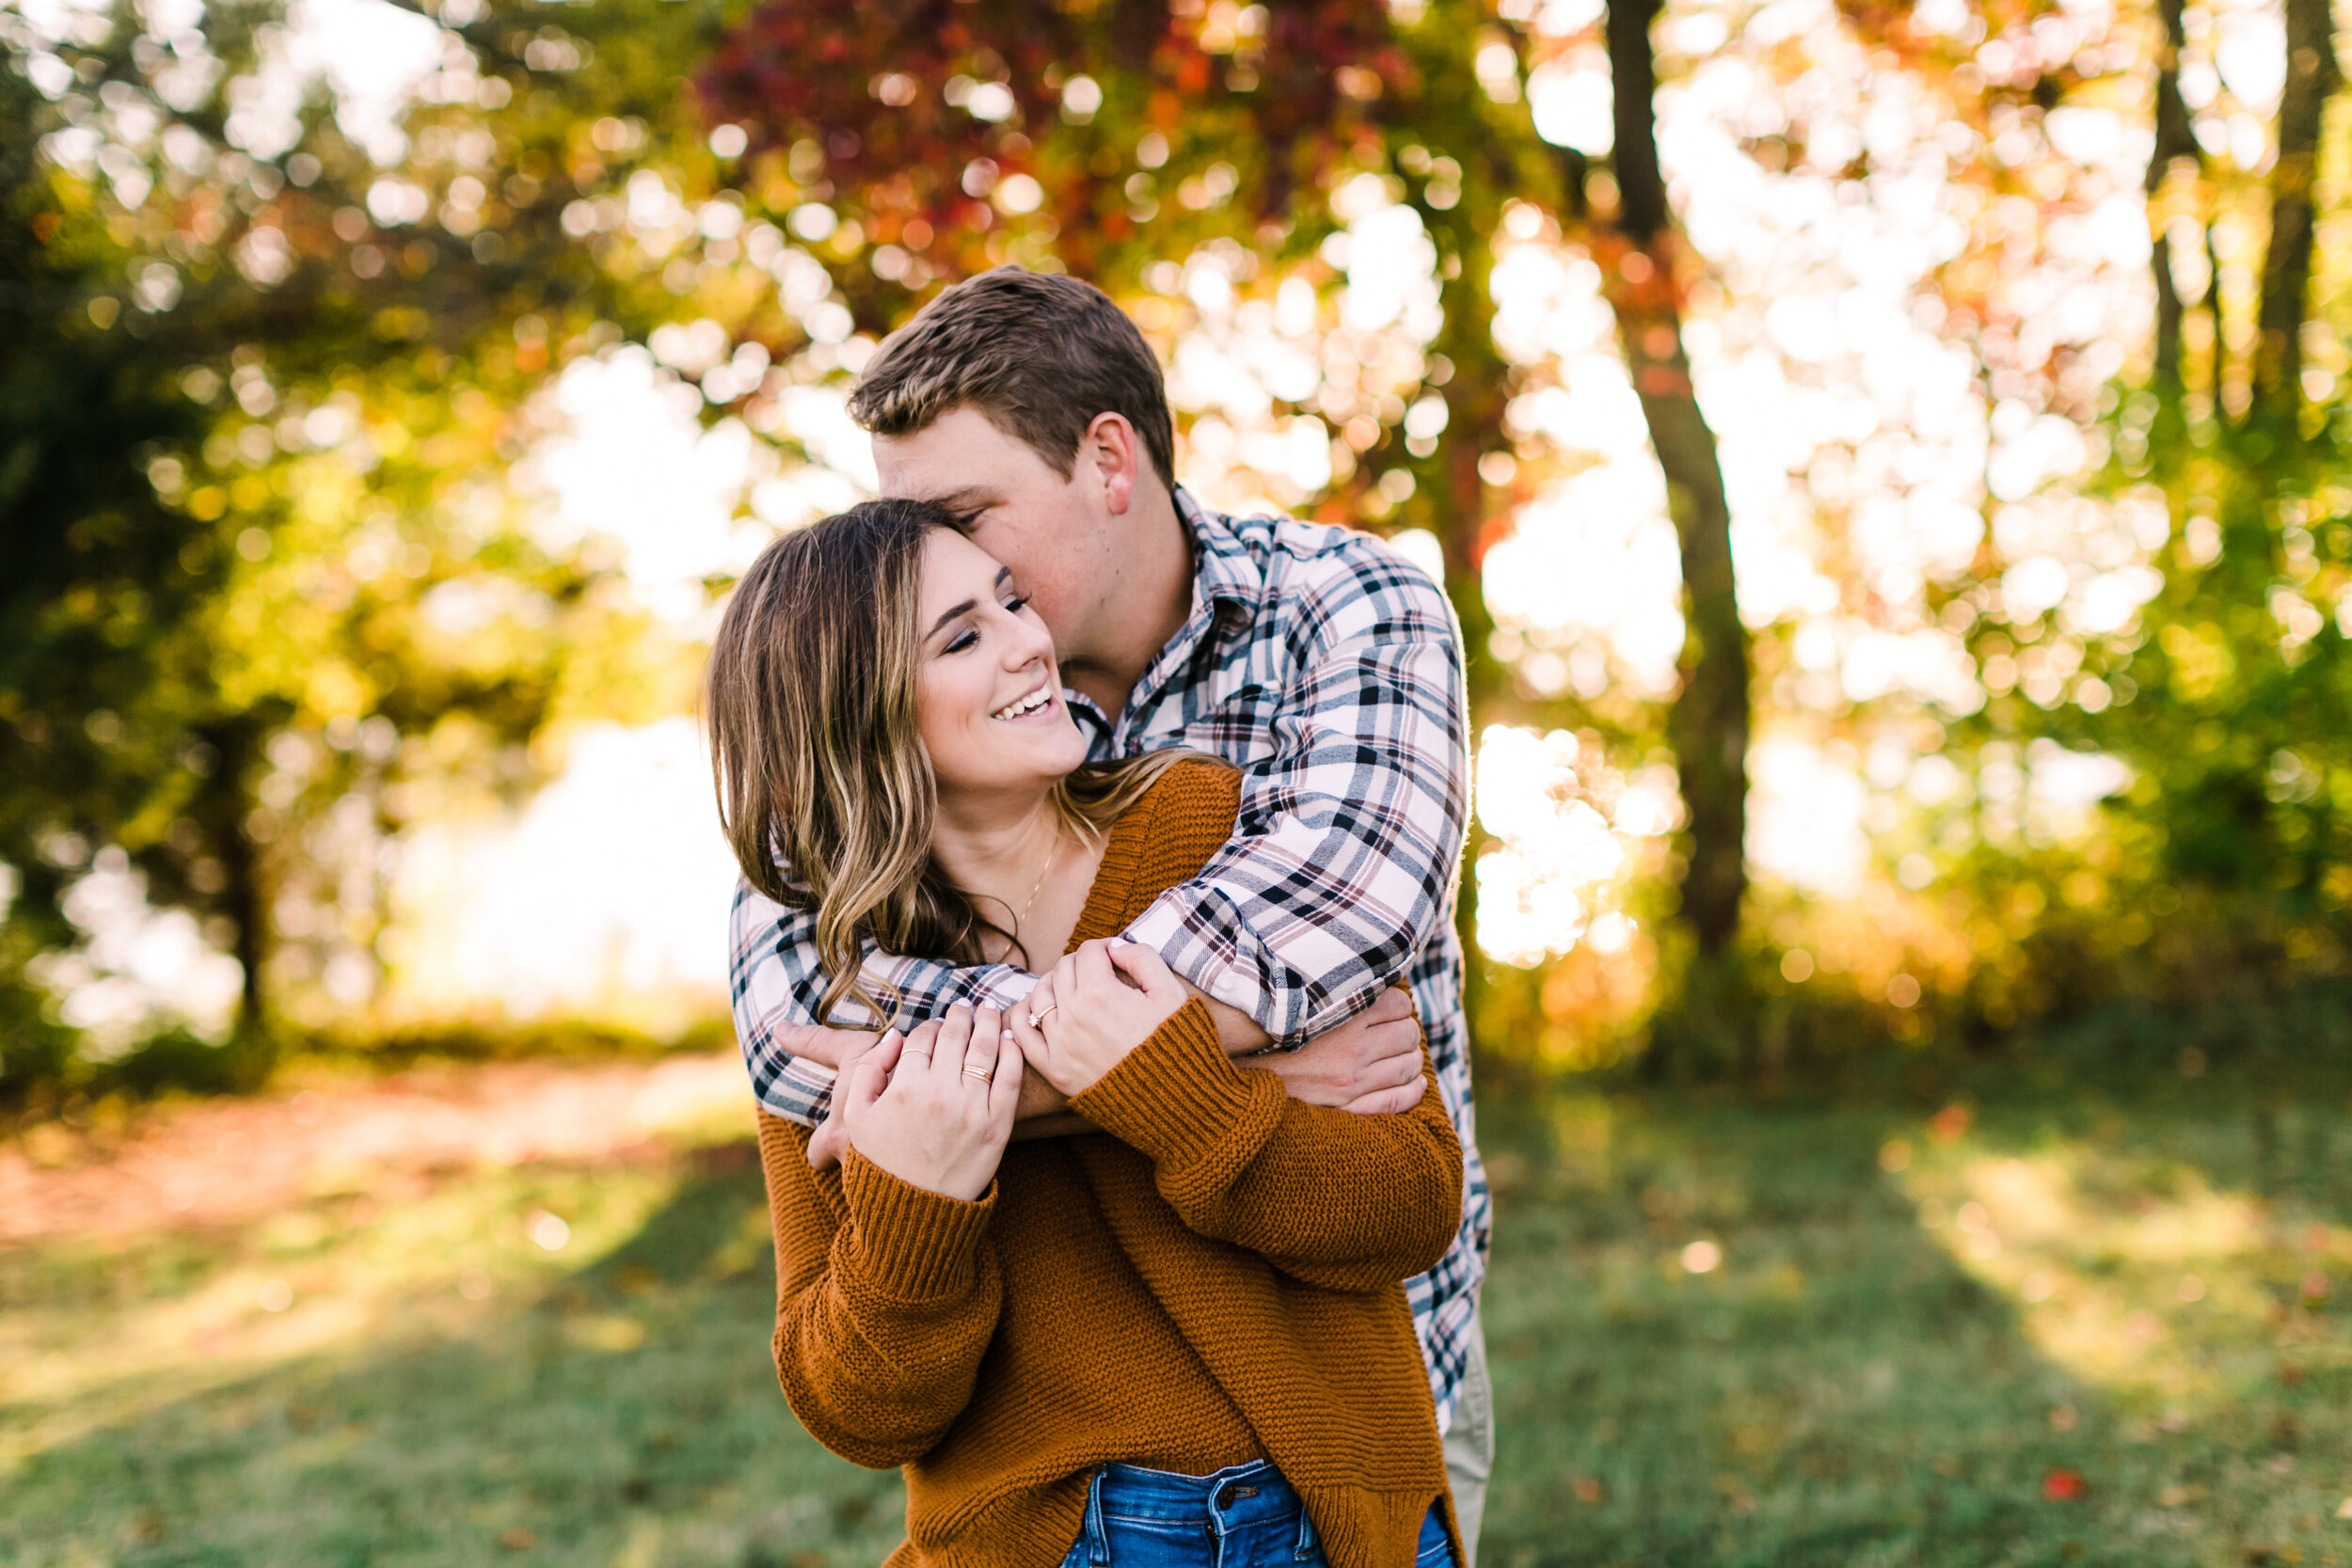 Tennessee+Fall+Engagement+Photos+Puppy (39 of 63).jpg